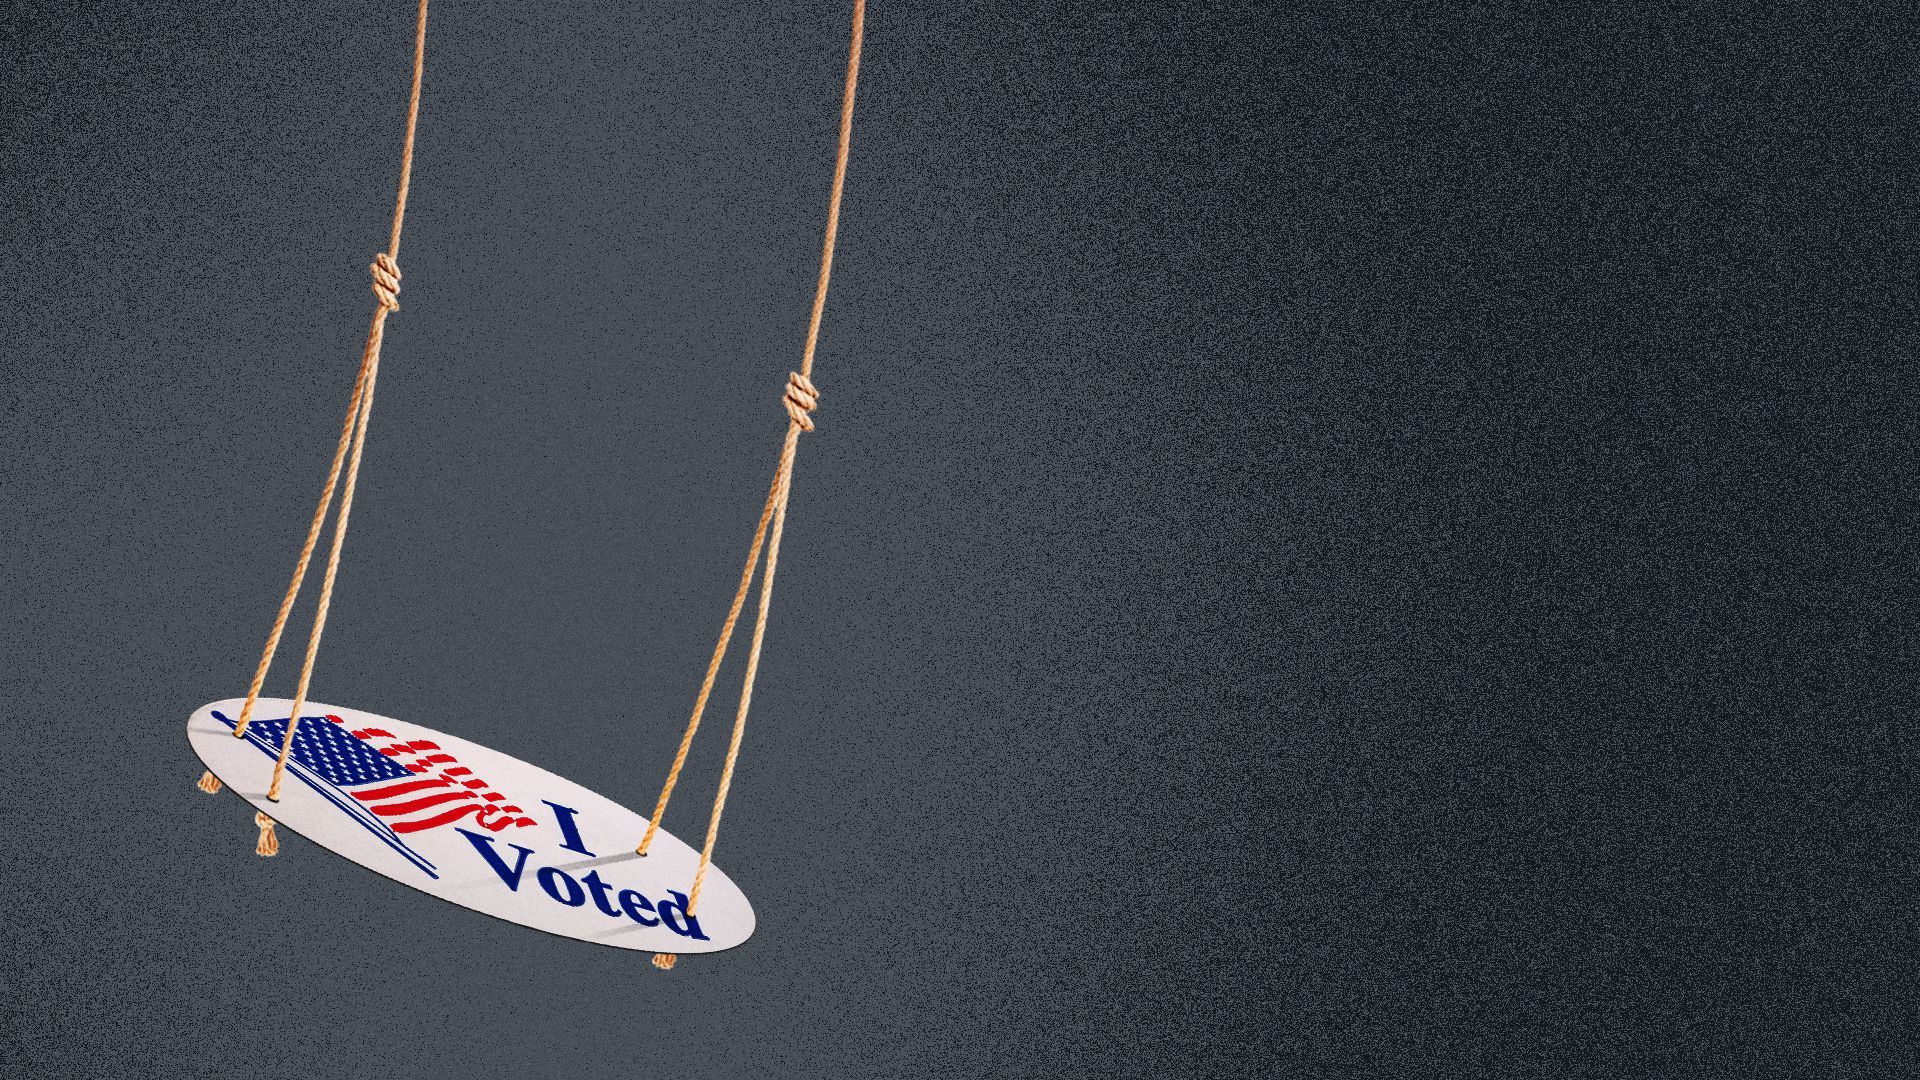 Illustration of an "I Voted" sticker as a swing.